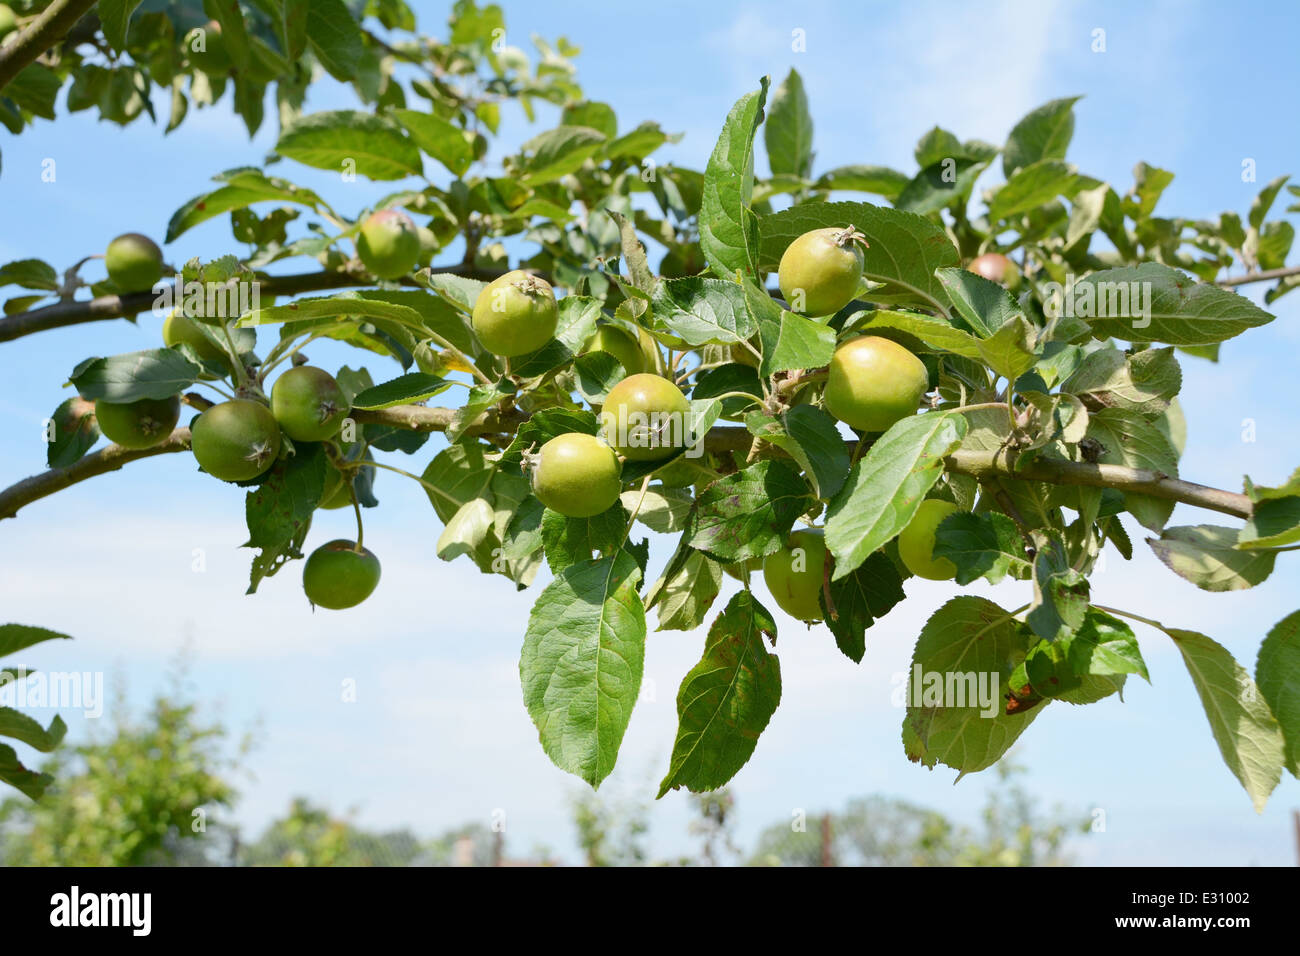 Branch laden with small green apples against a blue sky Stock Photo